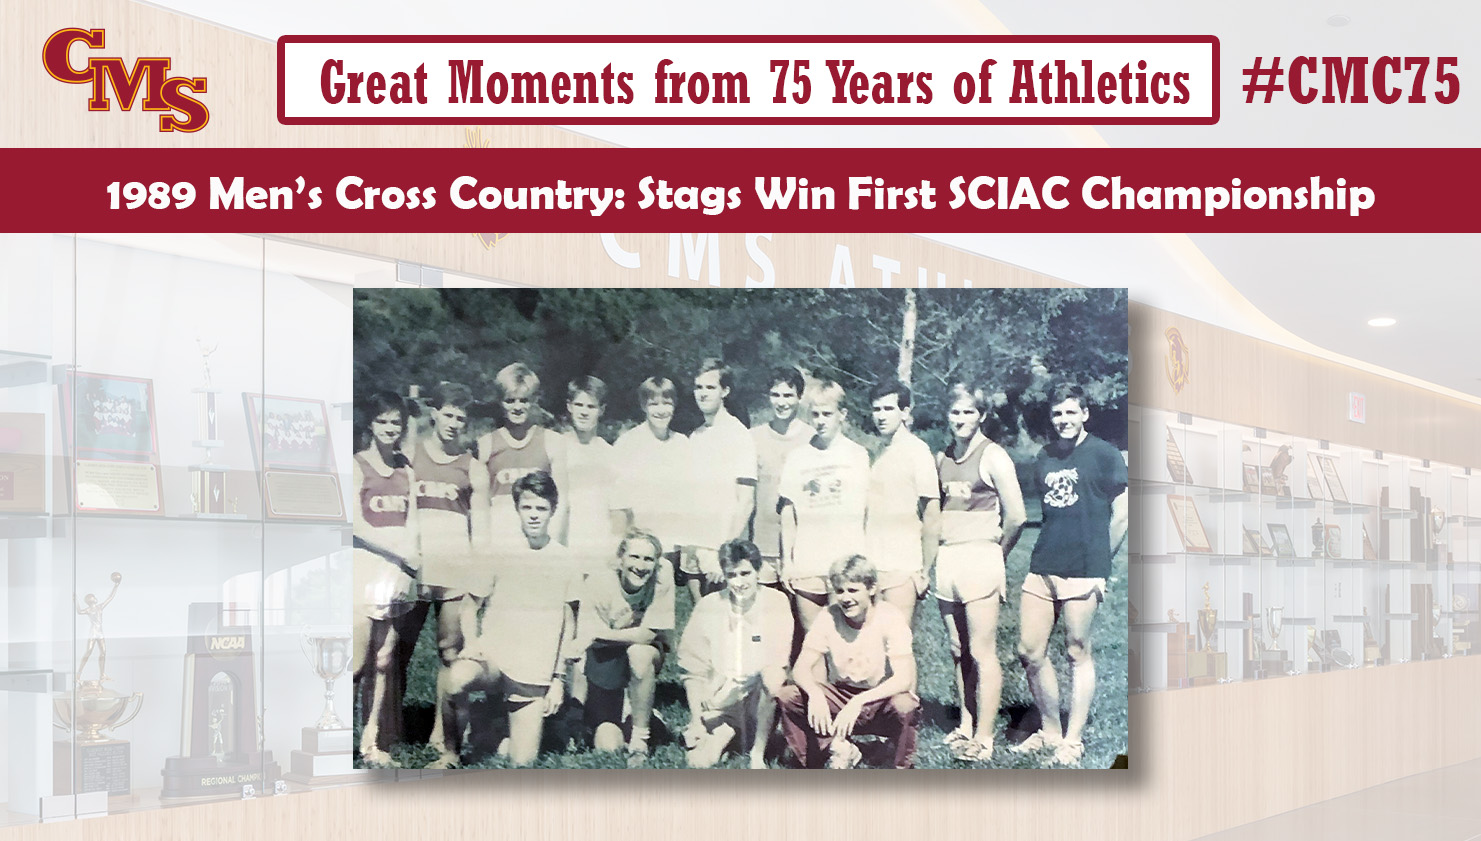 1989 men's cross country team photo. Words over the photo read: Great Moments from 75 Years of Athletics. 1989 Men's Cross Country: Stags win First SCIAC Championship